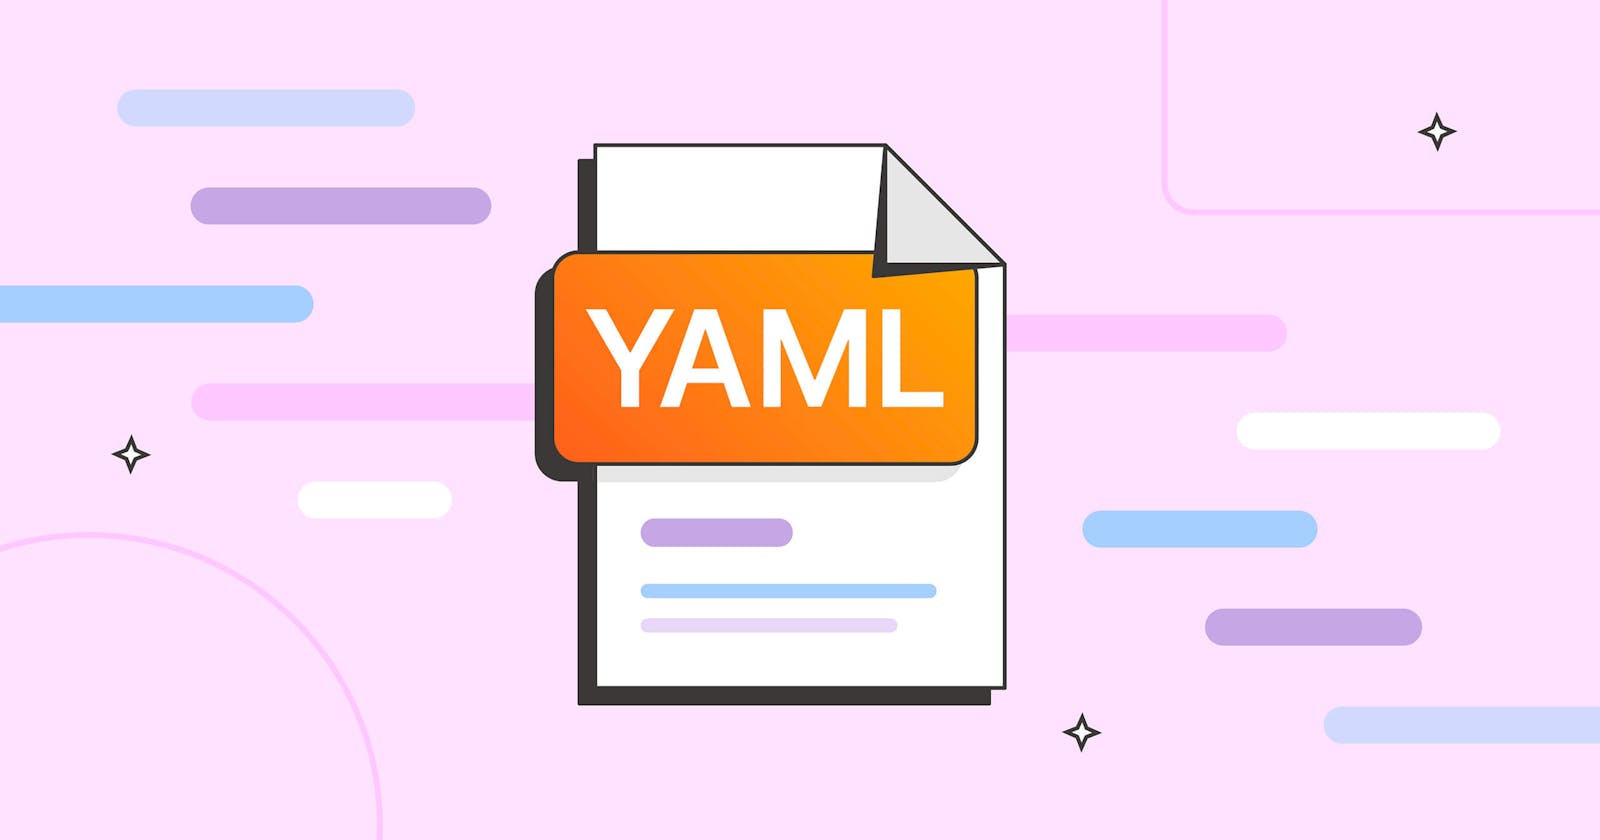 YAML Tutorial - A Complete Language Guide